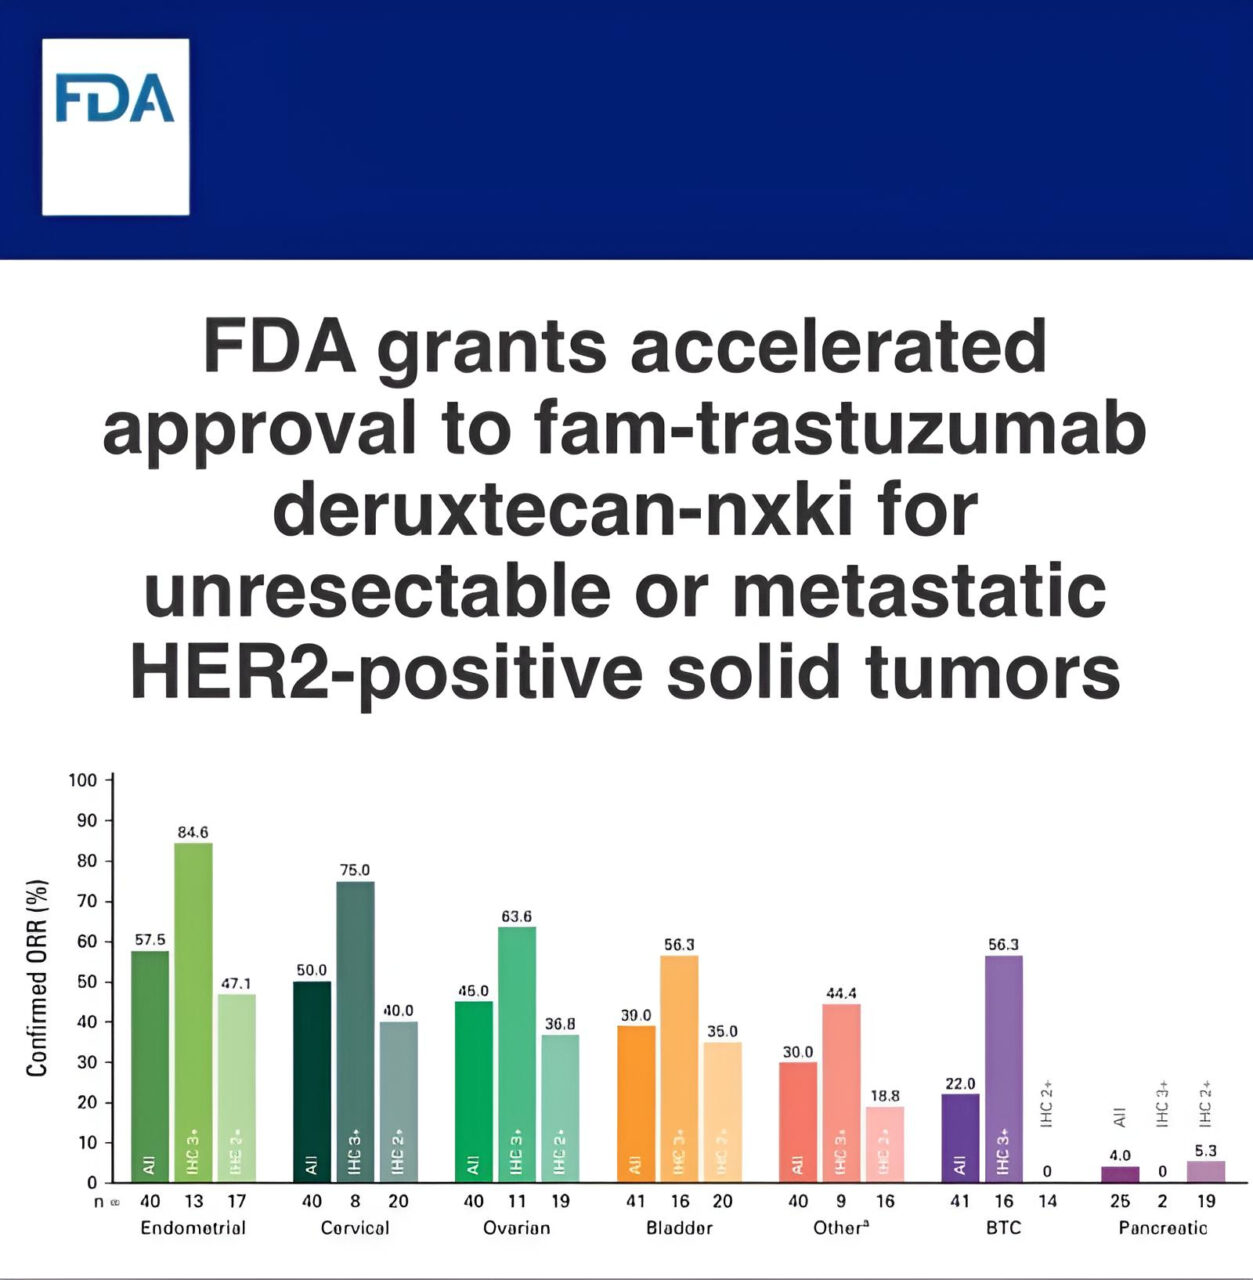 Paolo Tarantino: Trastuzumab deruxtecan is now FDA approved for ANY treatment-refractory HER2+ solid tumor